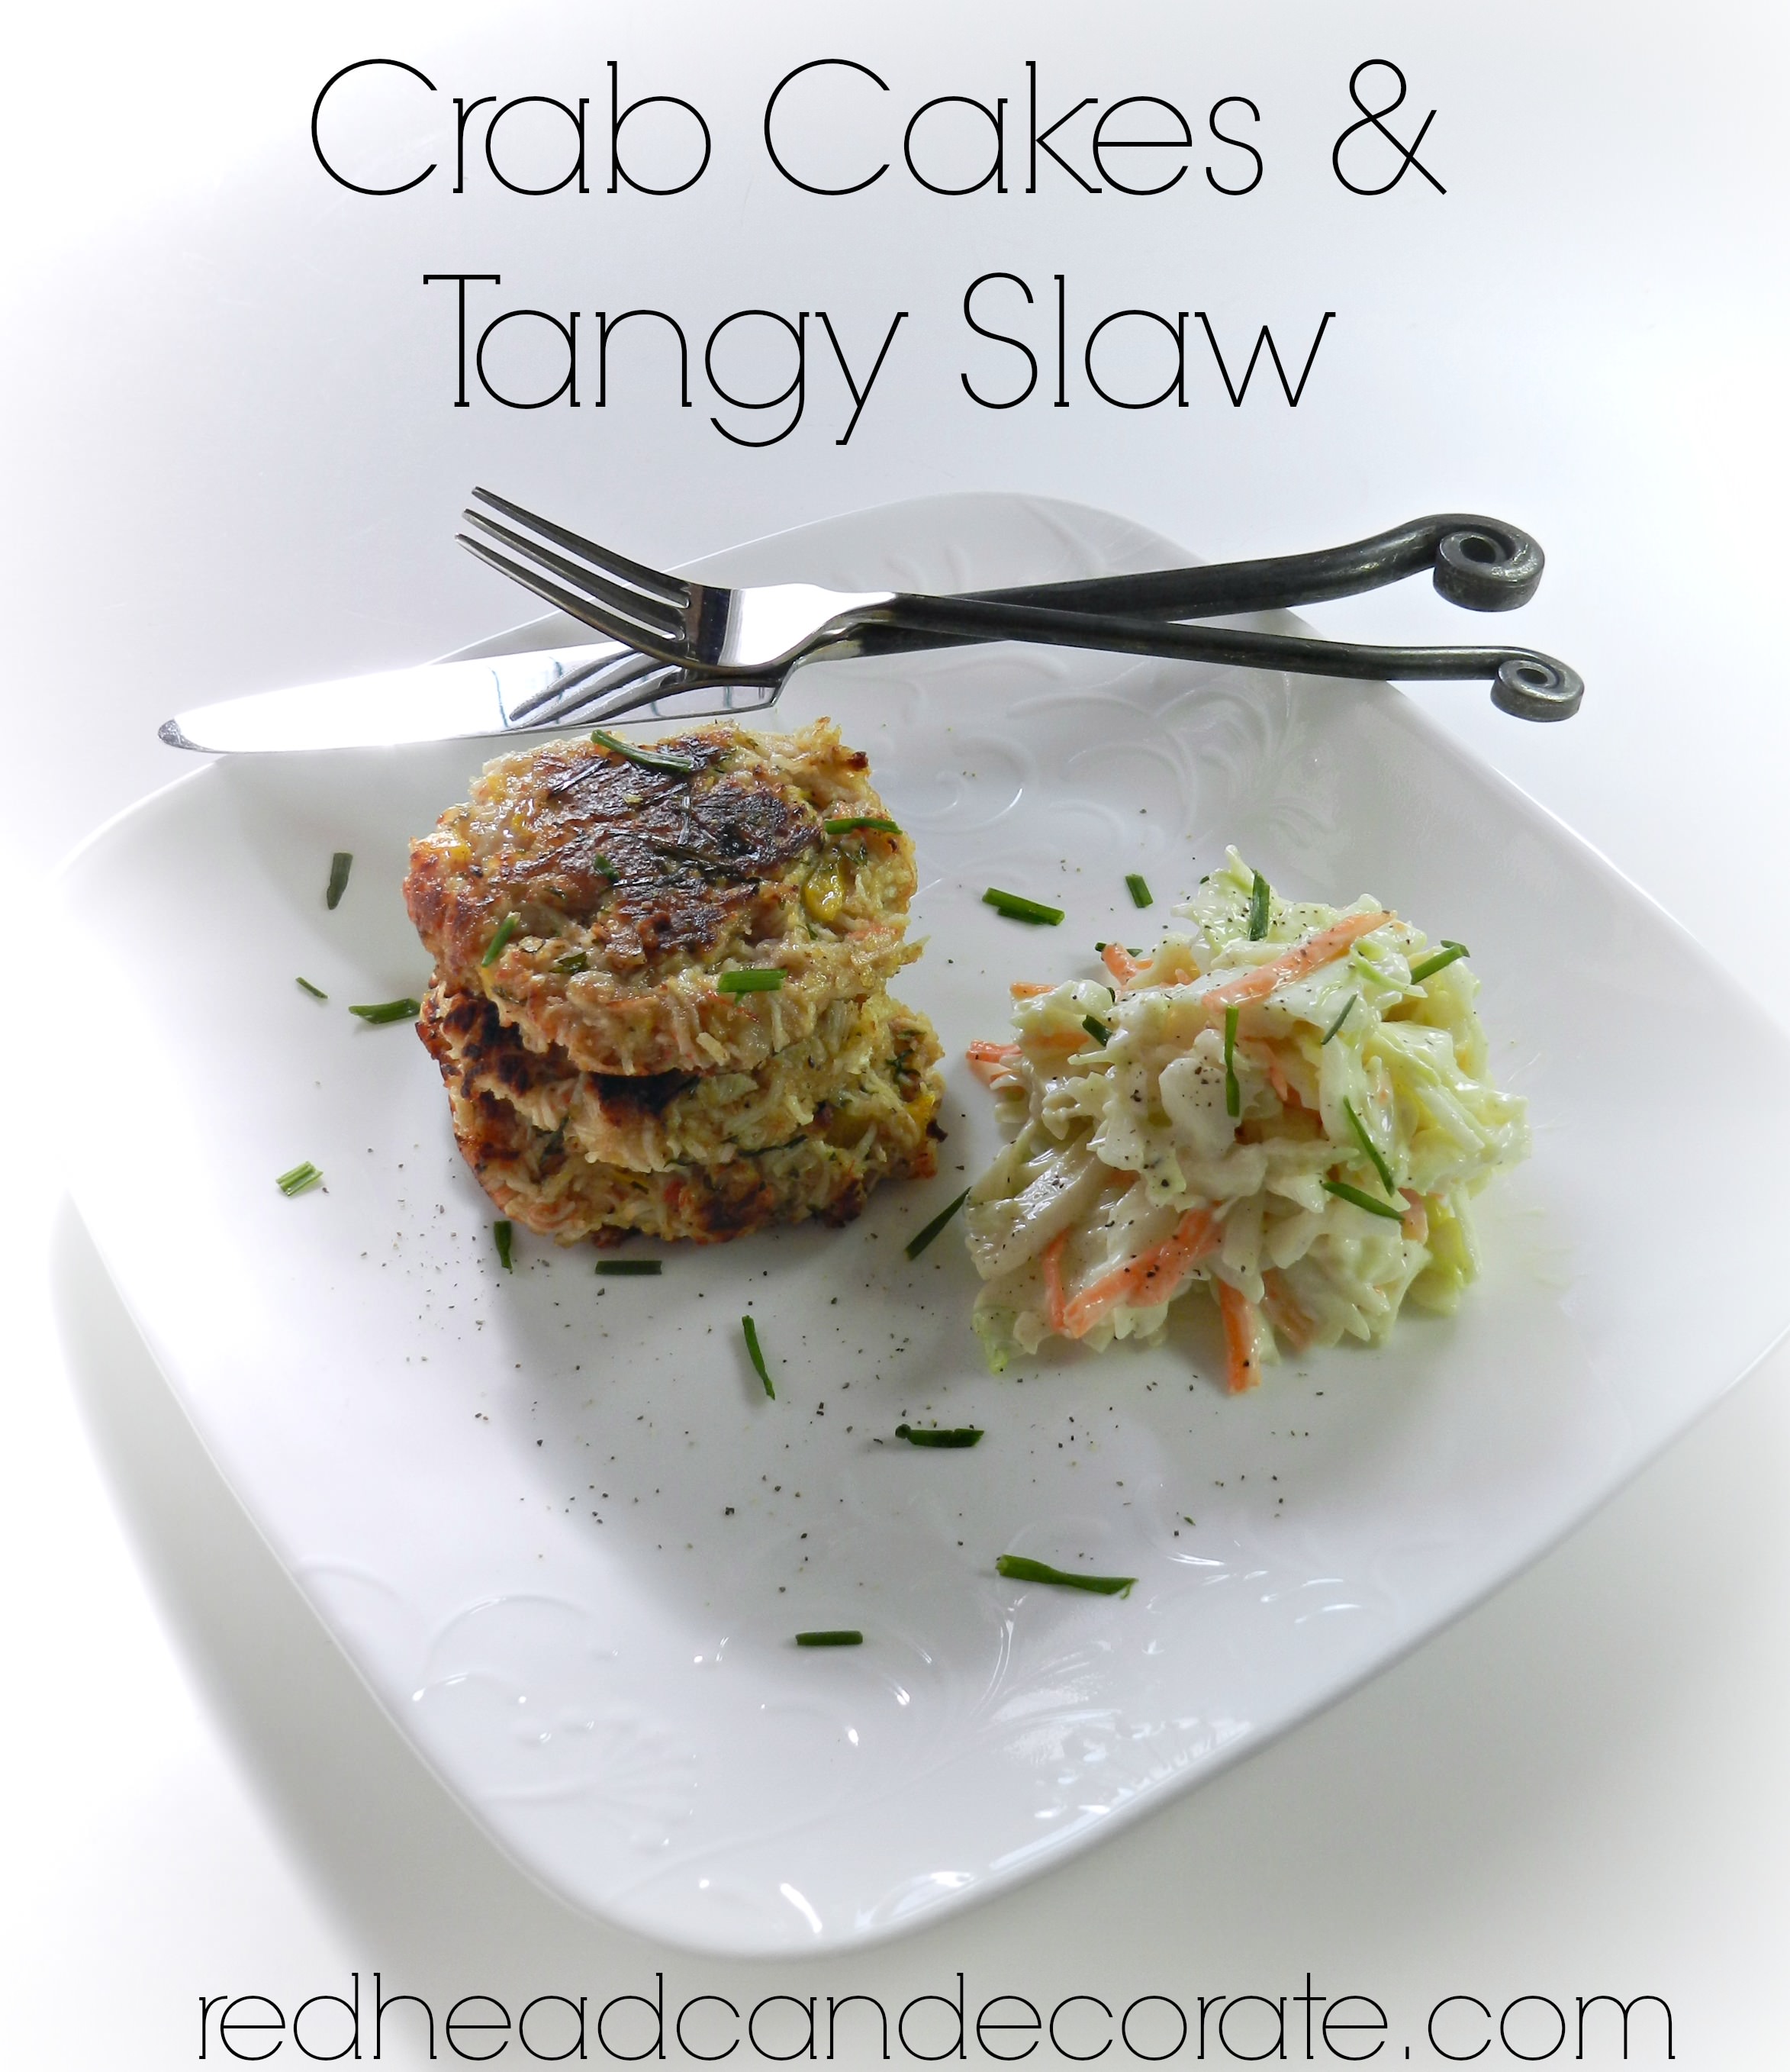 Crab Cakes & Tangy Slaw